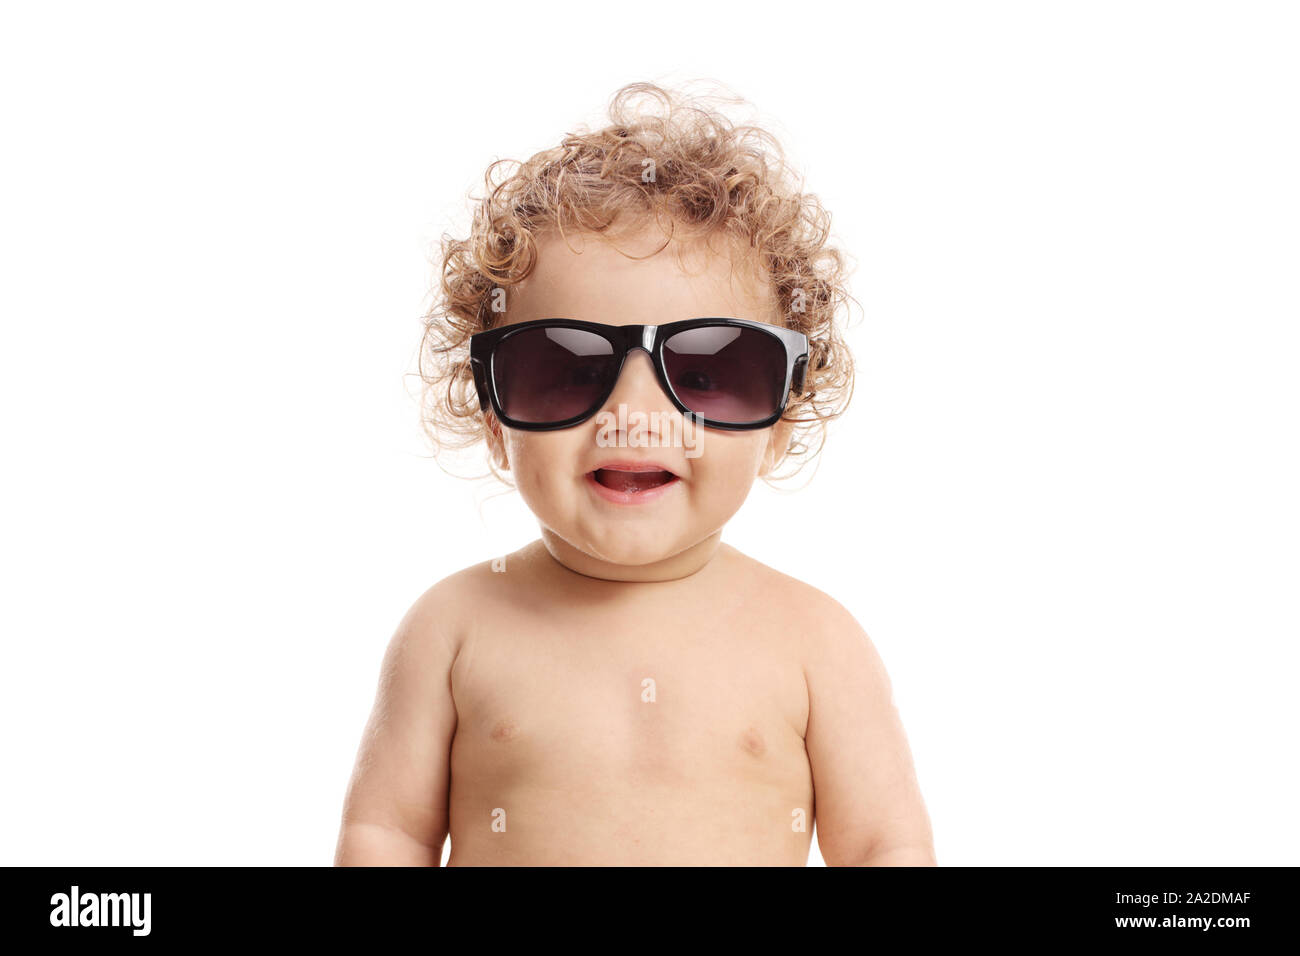 Baby boy wearing a pair of sunglasses isolated on white background Stock Photo